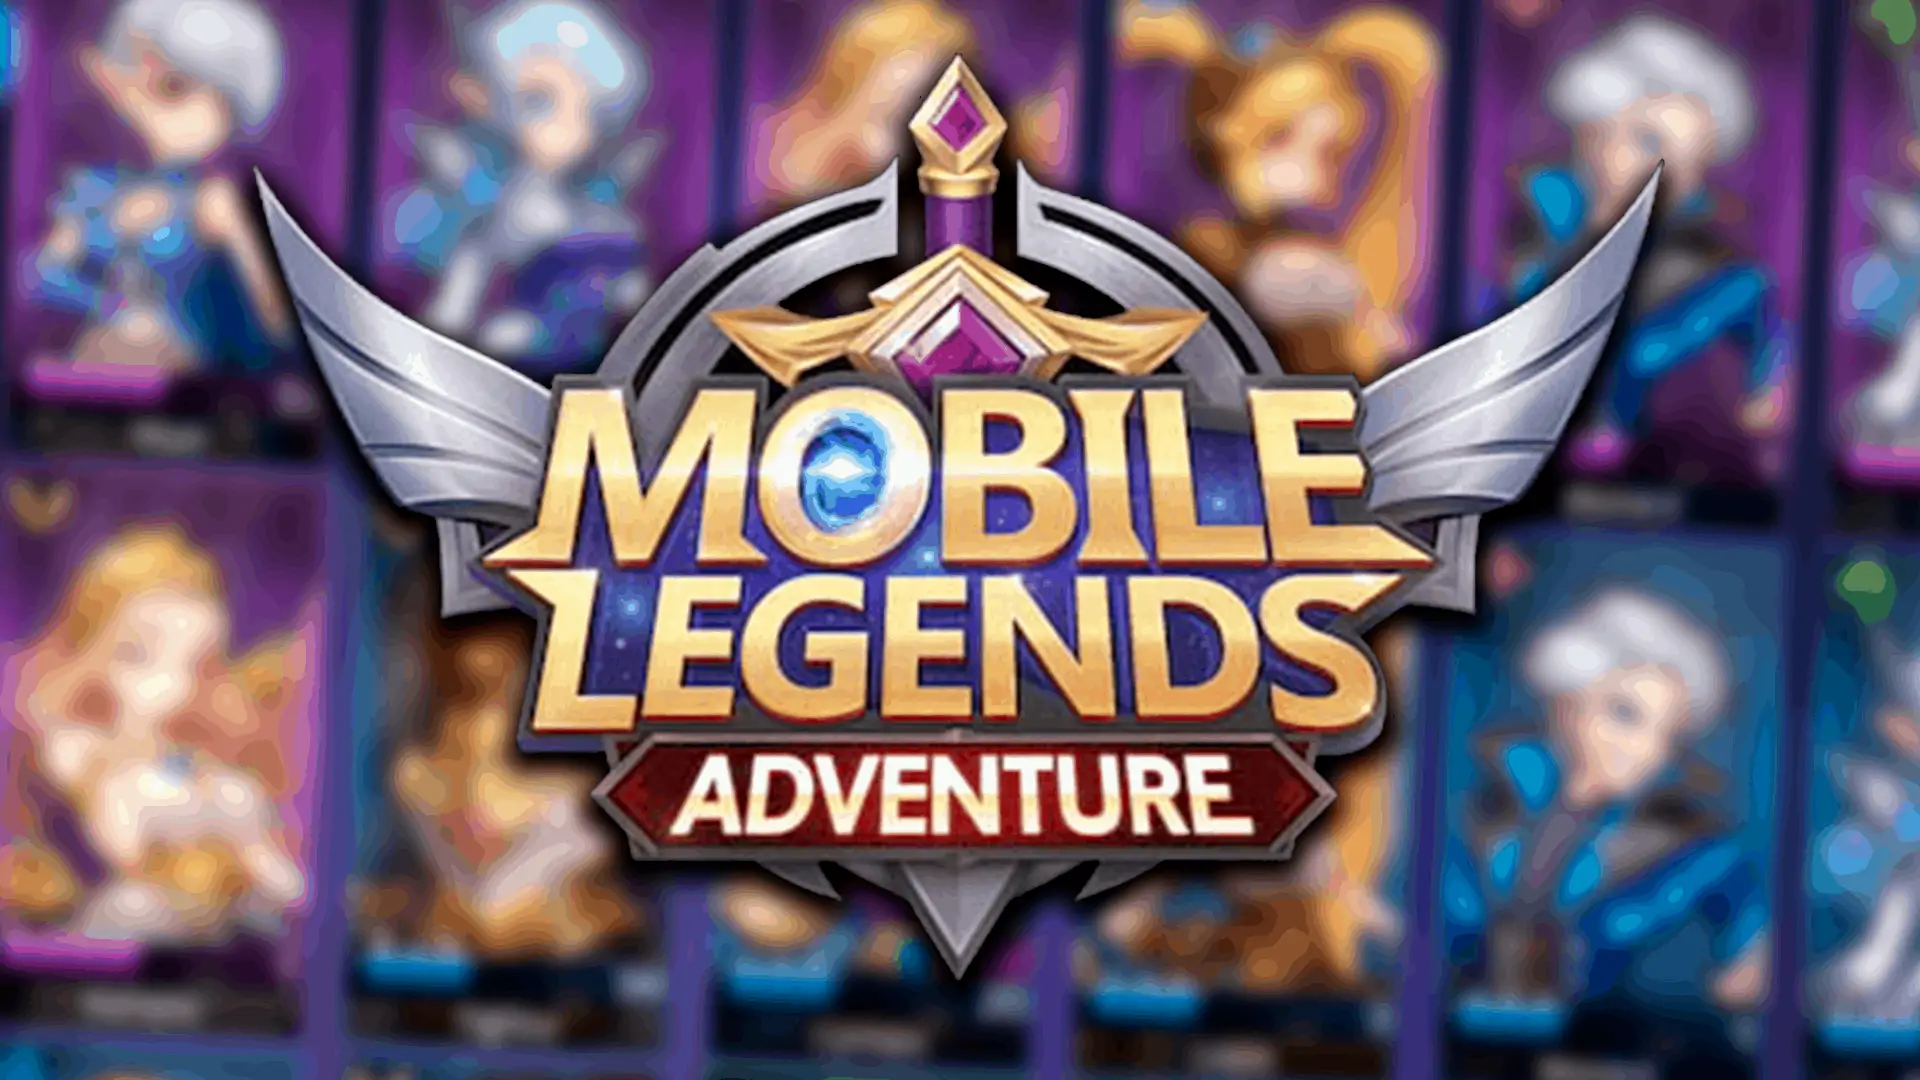 You are currently viewing All Heroes List – Mobile Legends: Adventure